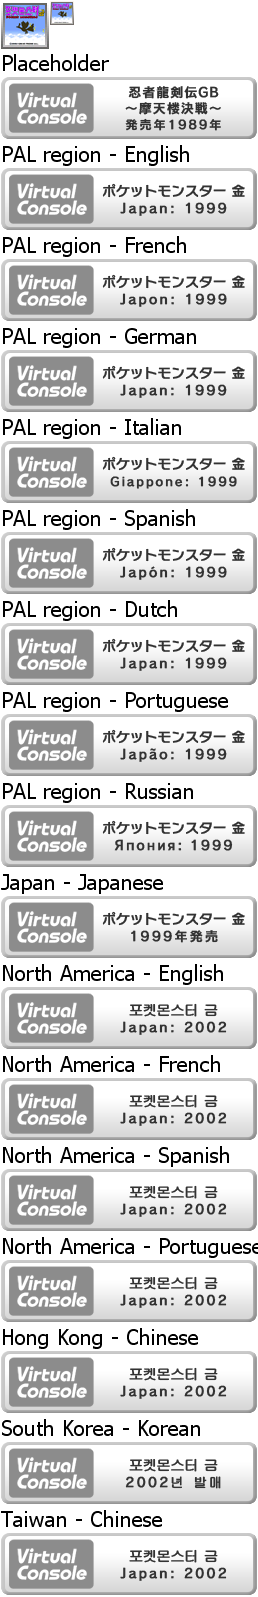 Virtual Console - Pocket Monsters Geum